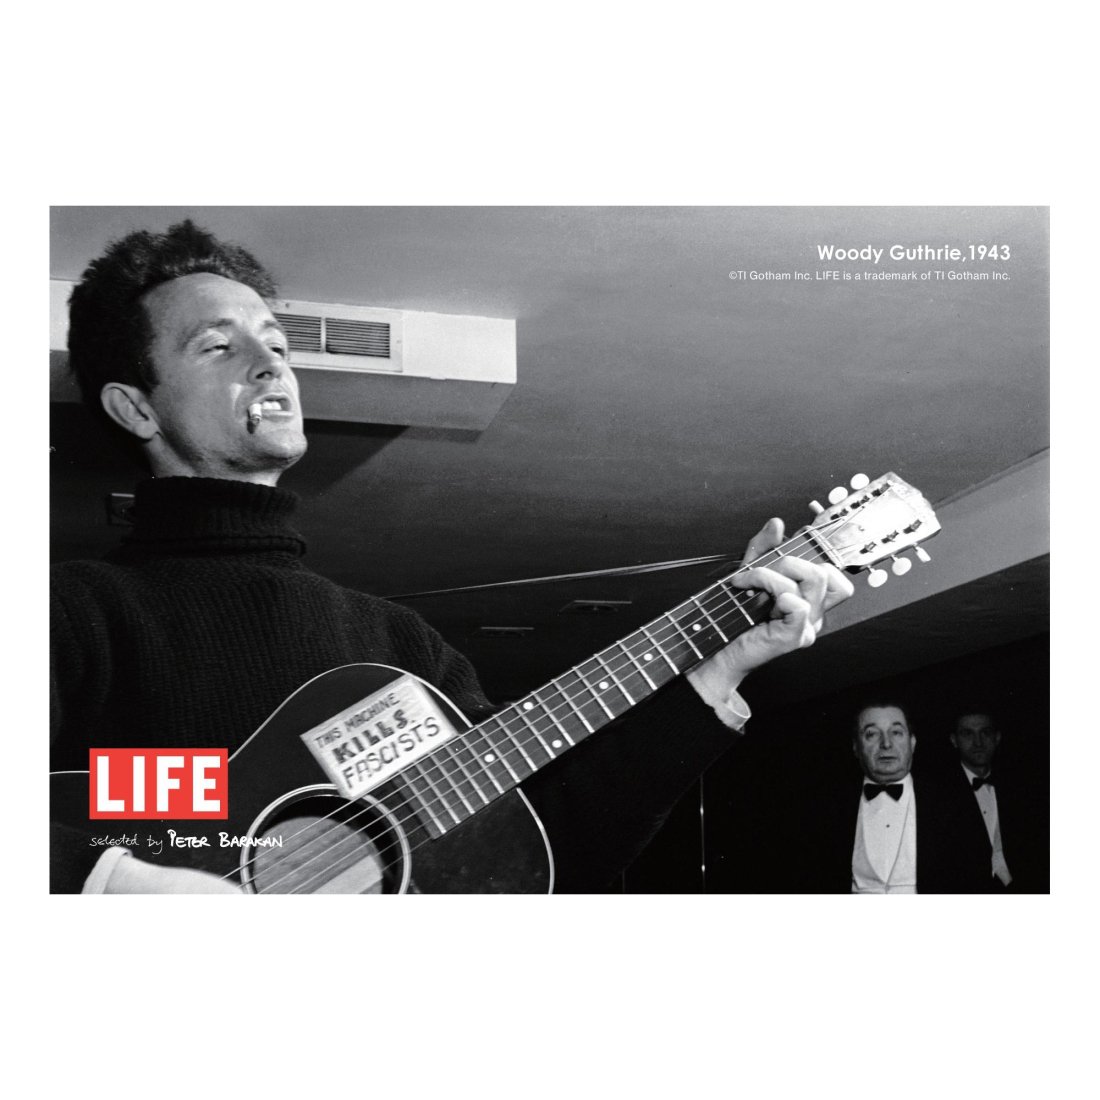 LIFE selected by PETER BARAKAN 「Woody Guthrie Plays, 1943」 ART POSTER (A3 size)